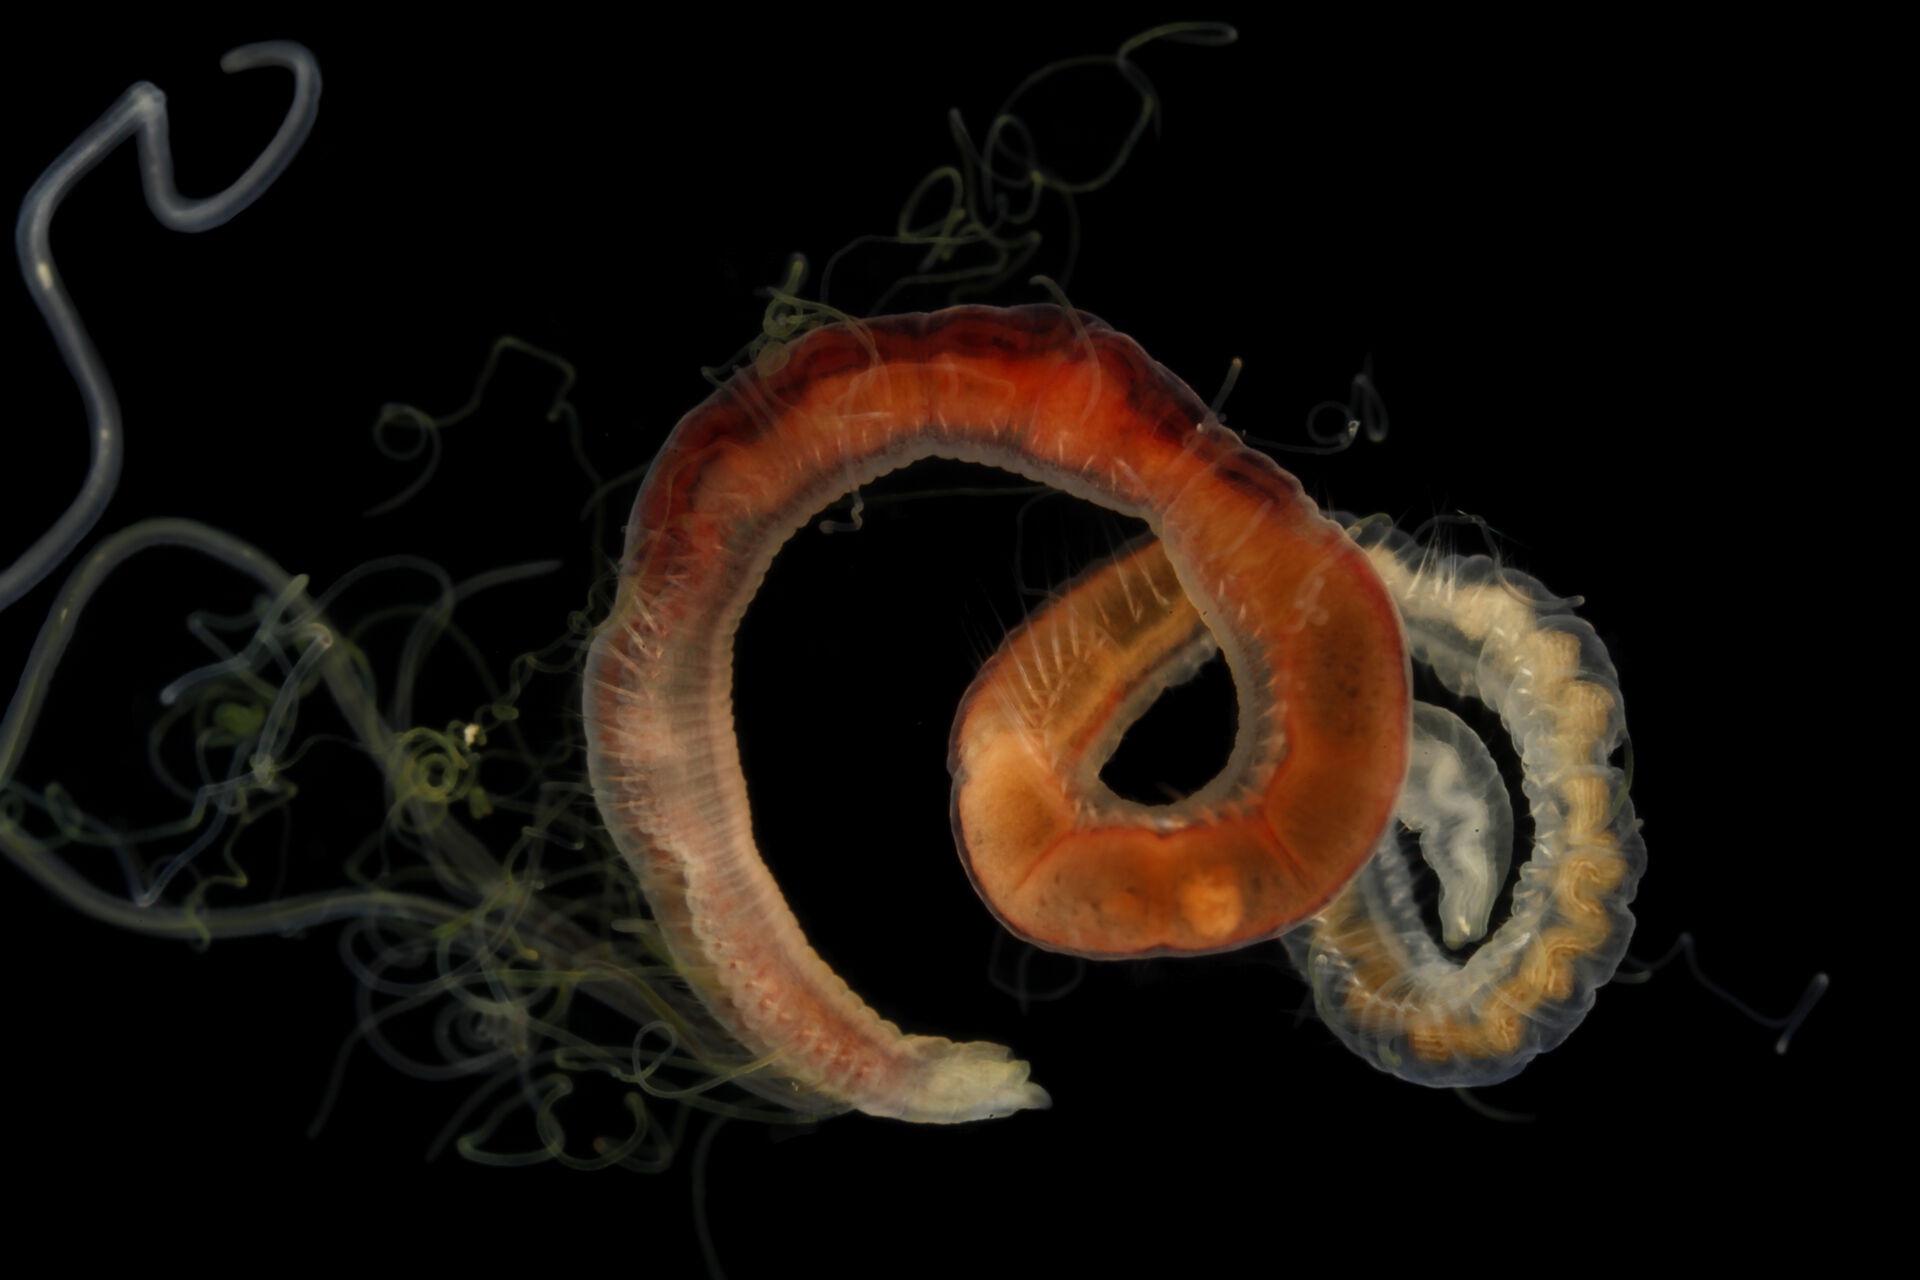 Picture of a marine worm in front of black background.